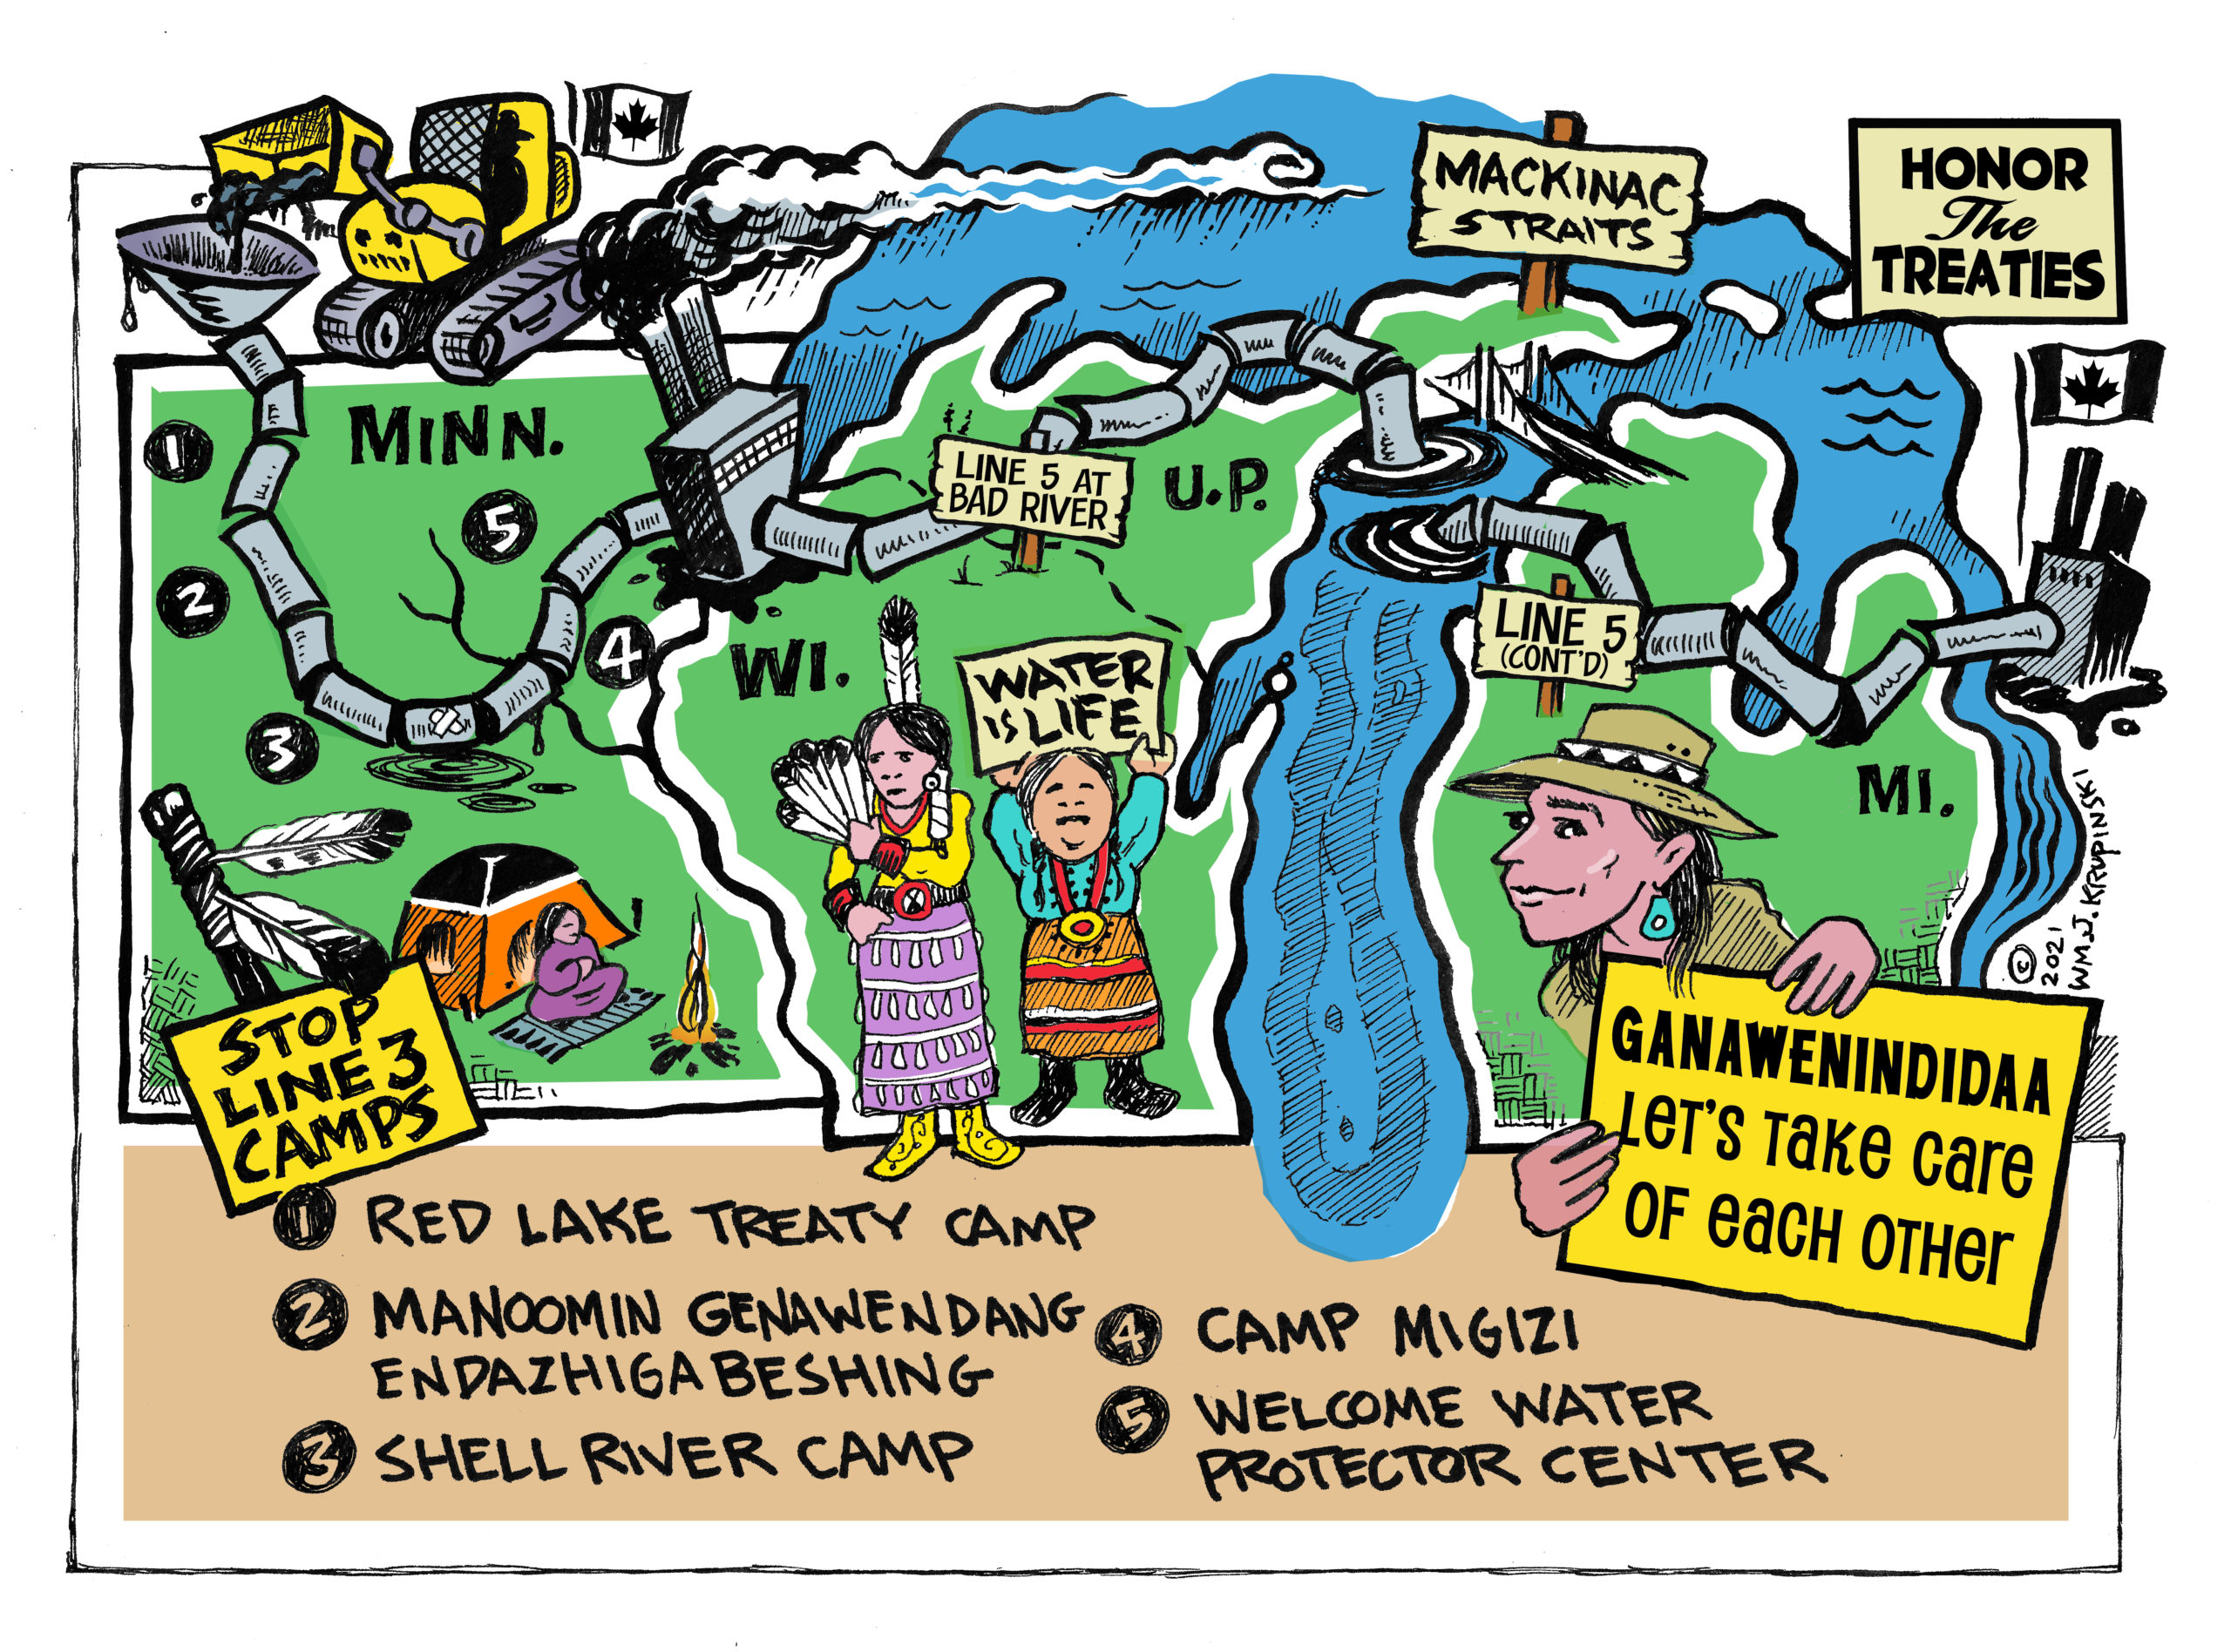 An illustration of the Great Lakes region, through which Enbridge Energy's Lines 3 and 5 carrying tar sands oil flows / credit: Bill Krupinski